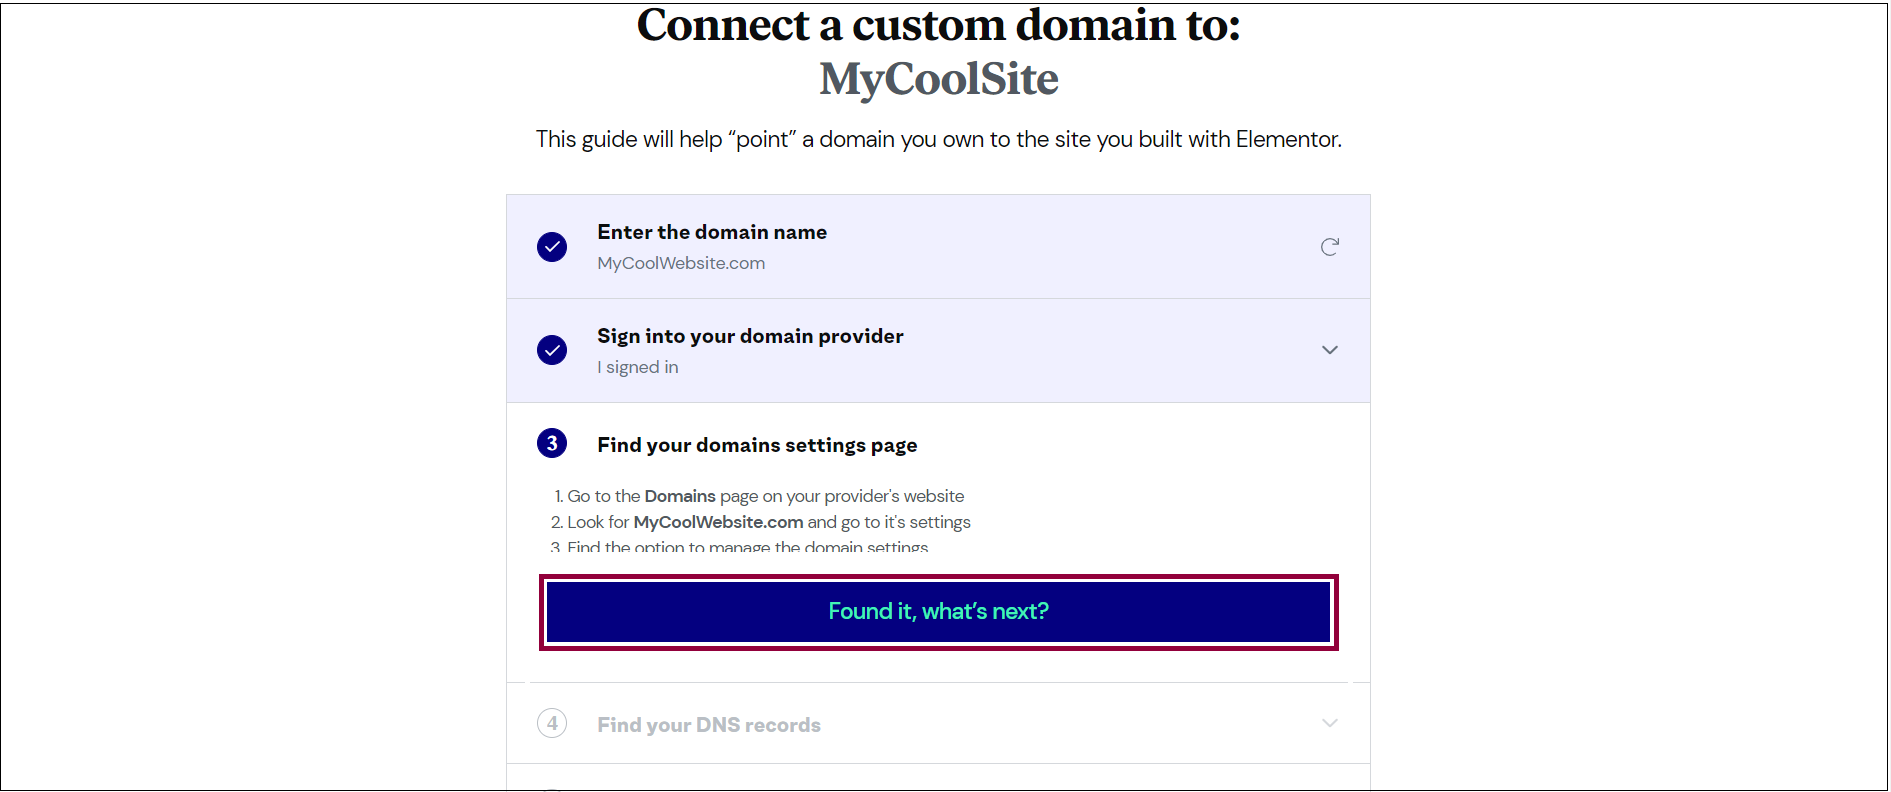 5 Connect a custom domain redder Connect your Hover domain 15